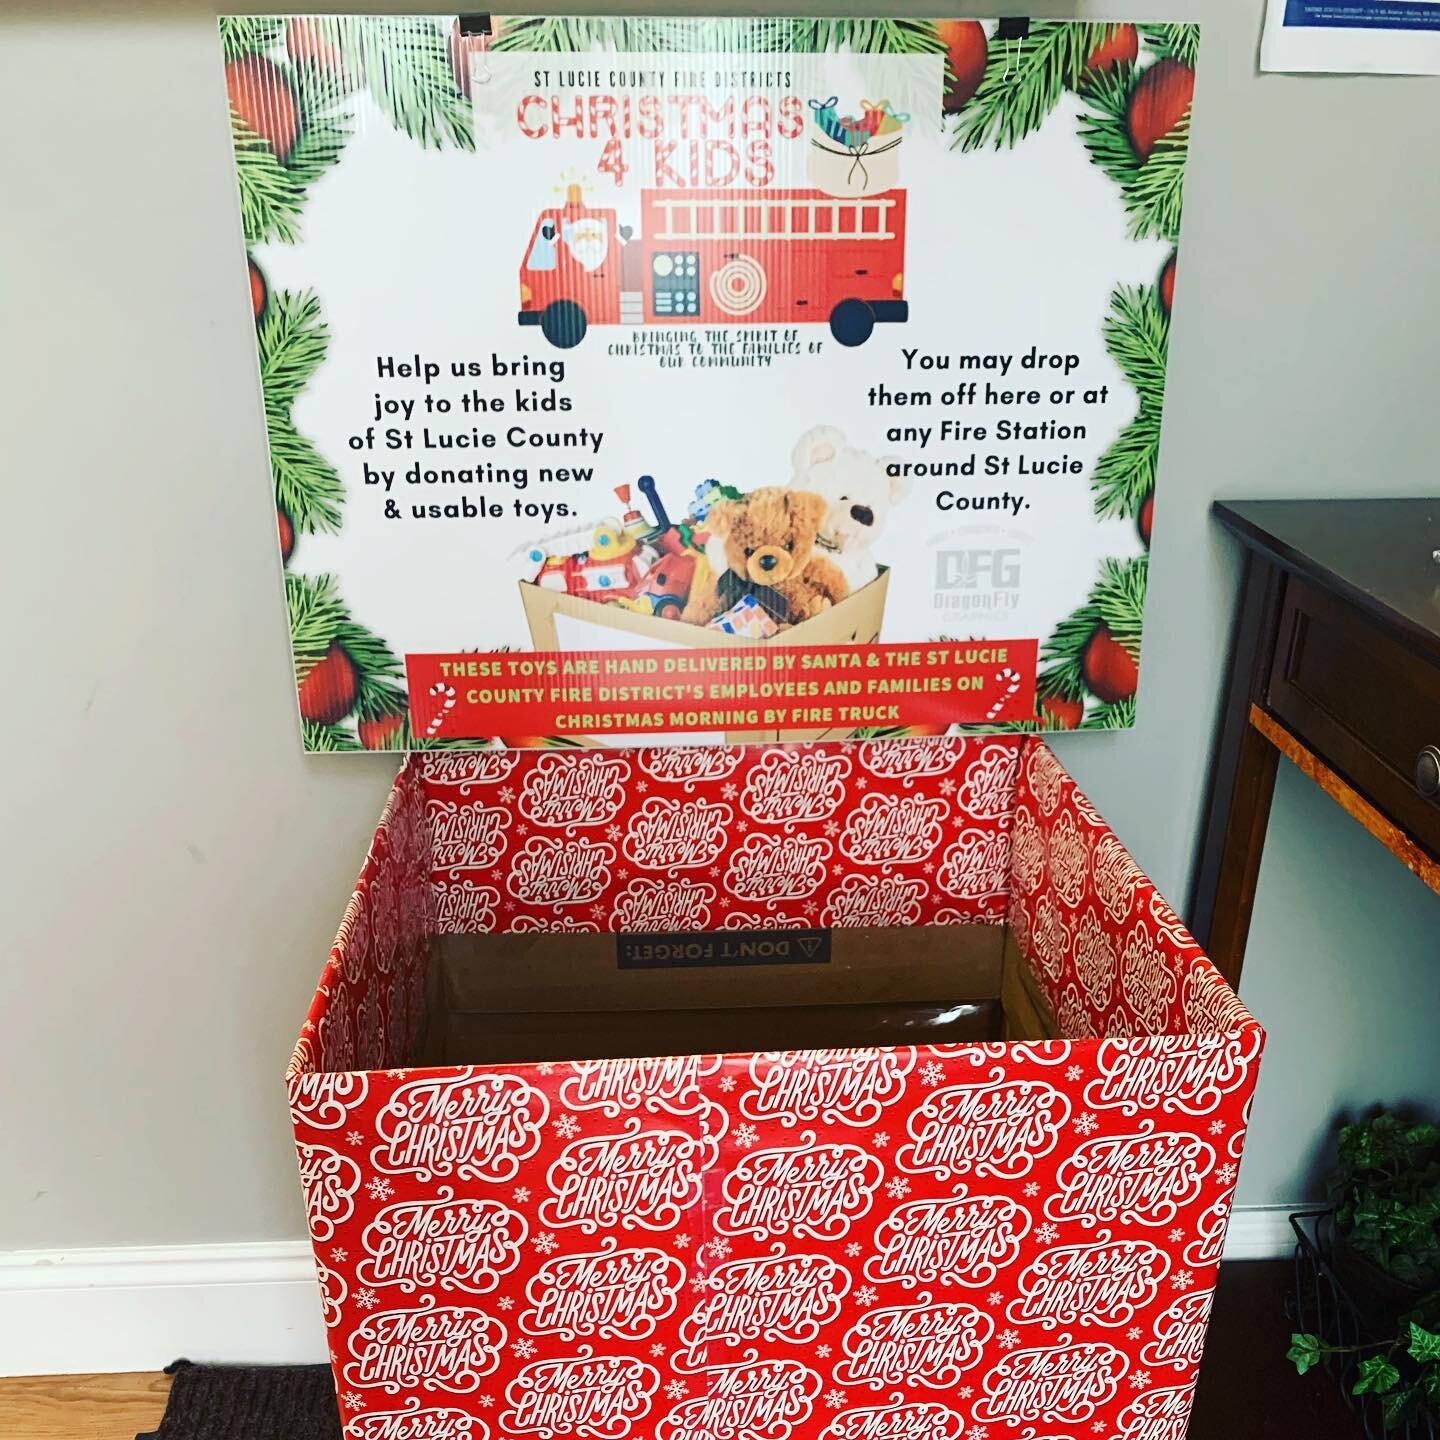 🚨Drop off location alert 🚨 
Solutions Therapy &amp; Learning 
1483 SW Bouganvillea Ave
Port St Lucie, FL 34953
#christmas4kids #supportstluciecounty #community #kidsinneed #supportlocal #slcfd #welovethekids #dropofftoys #donate #helpingothers #chr